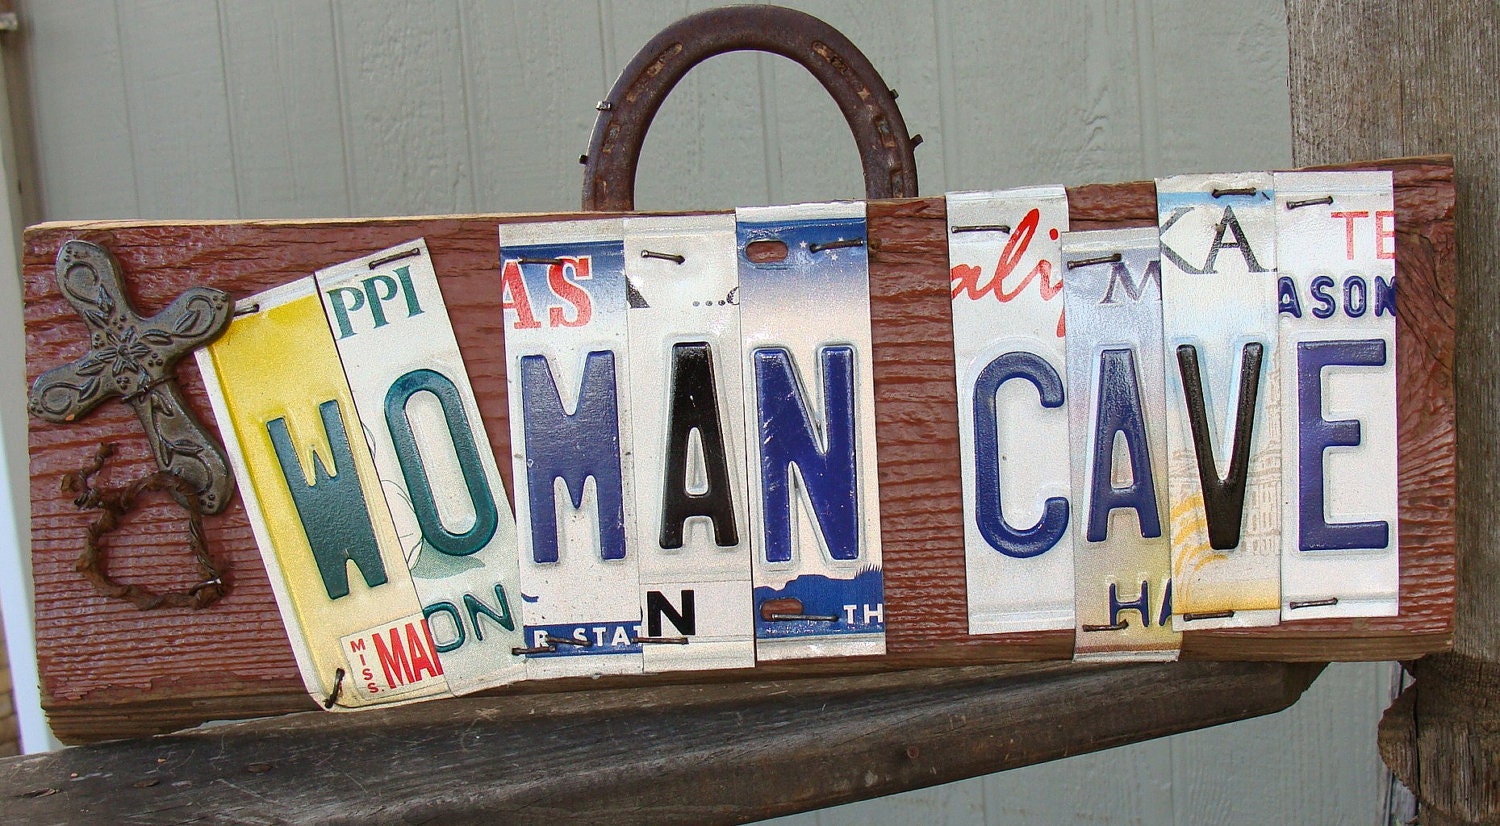 woman cave sign